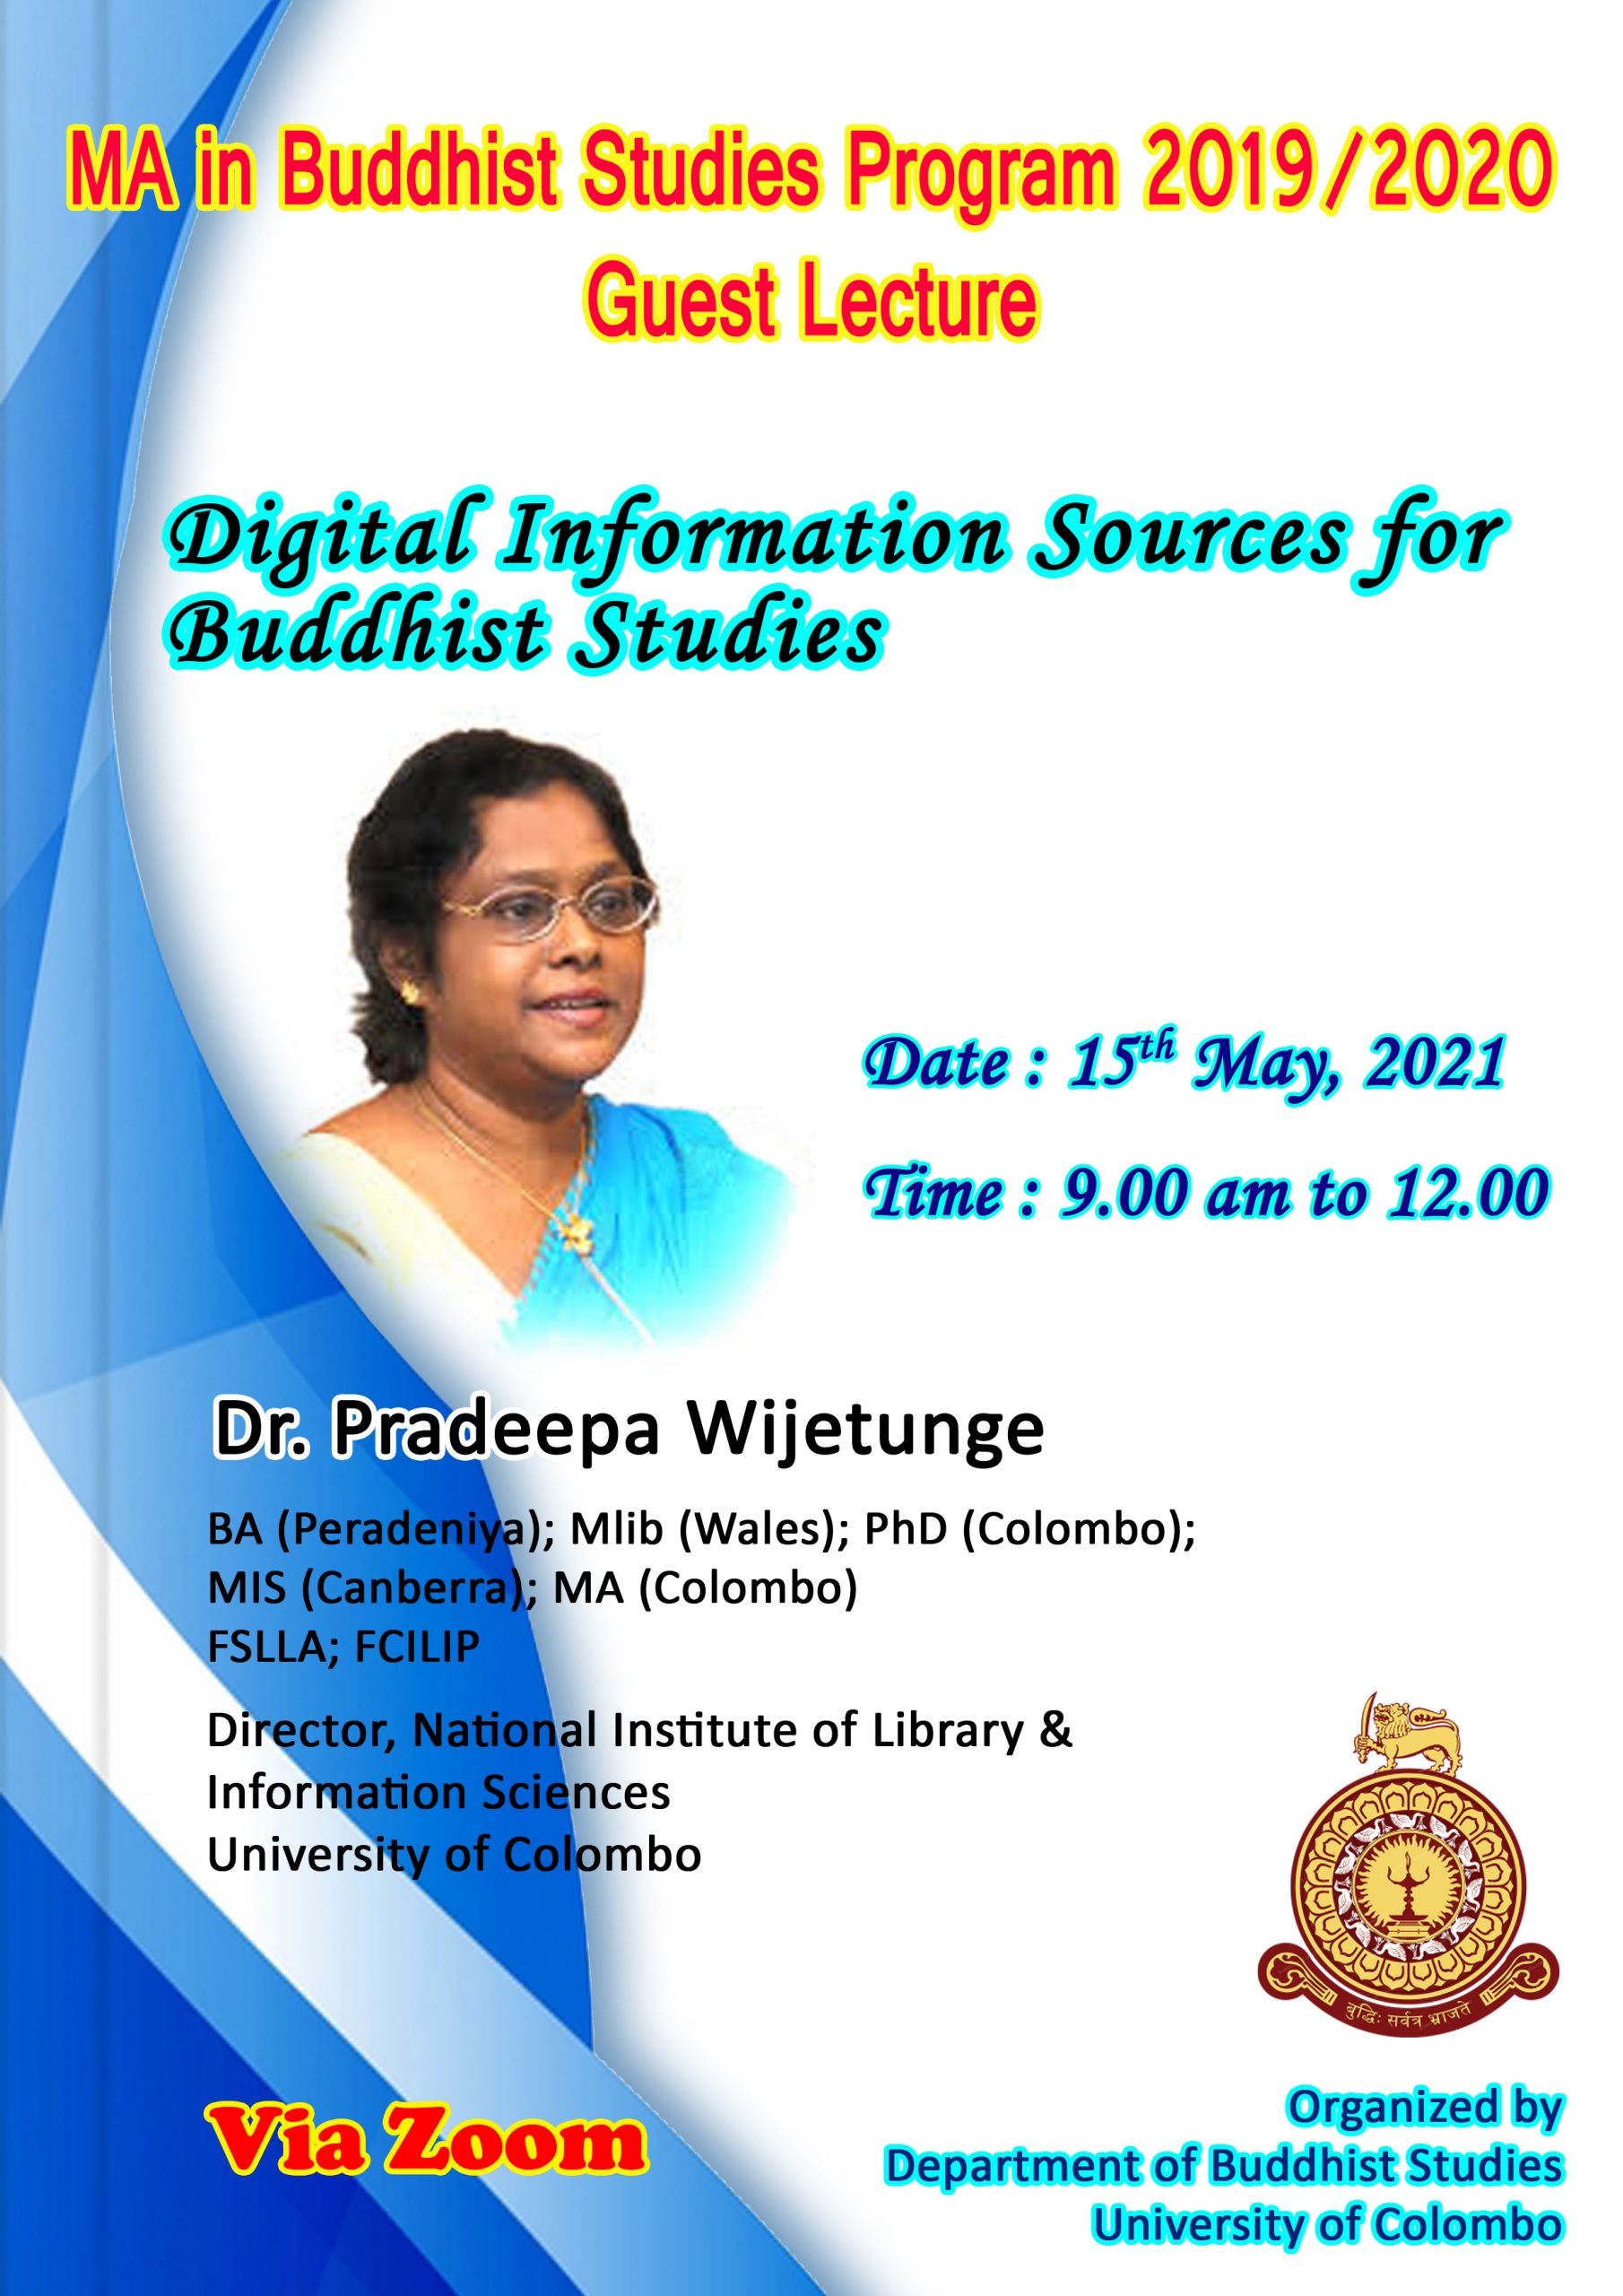 Guest Lecture on ‘Digital Information Sources for Buddhist Studies’